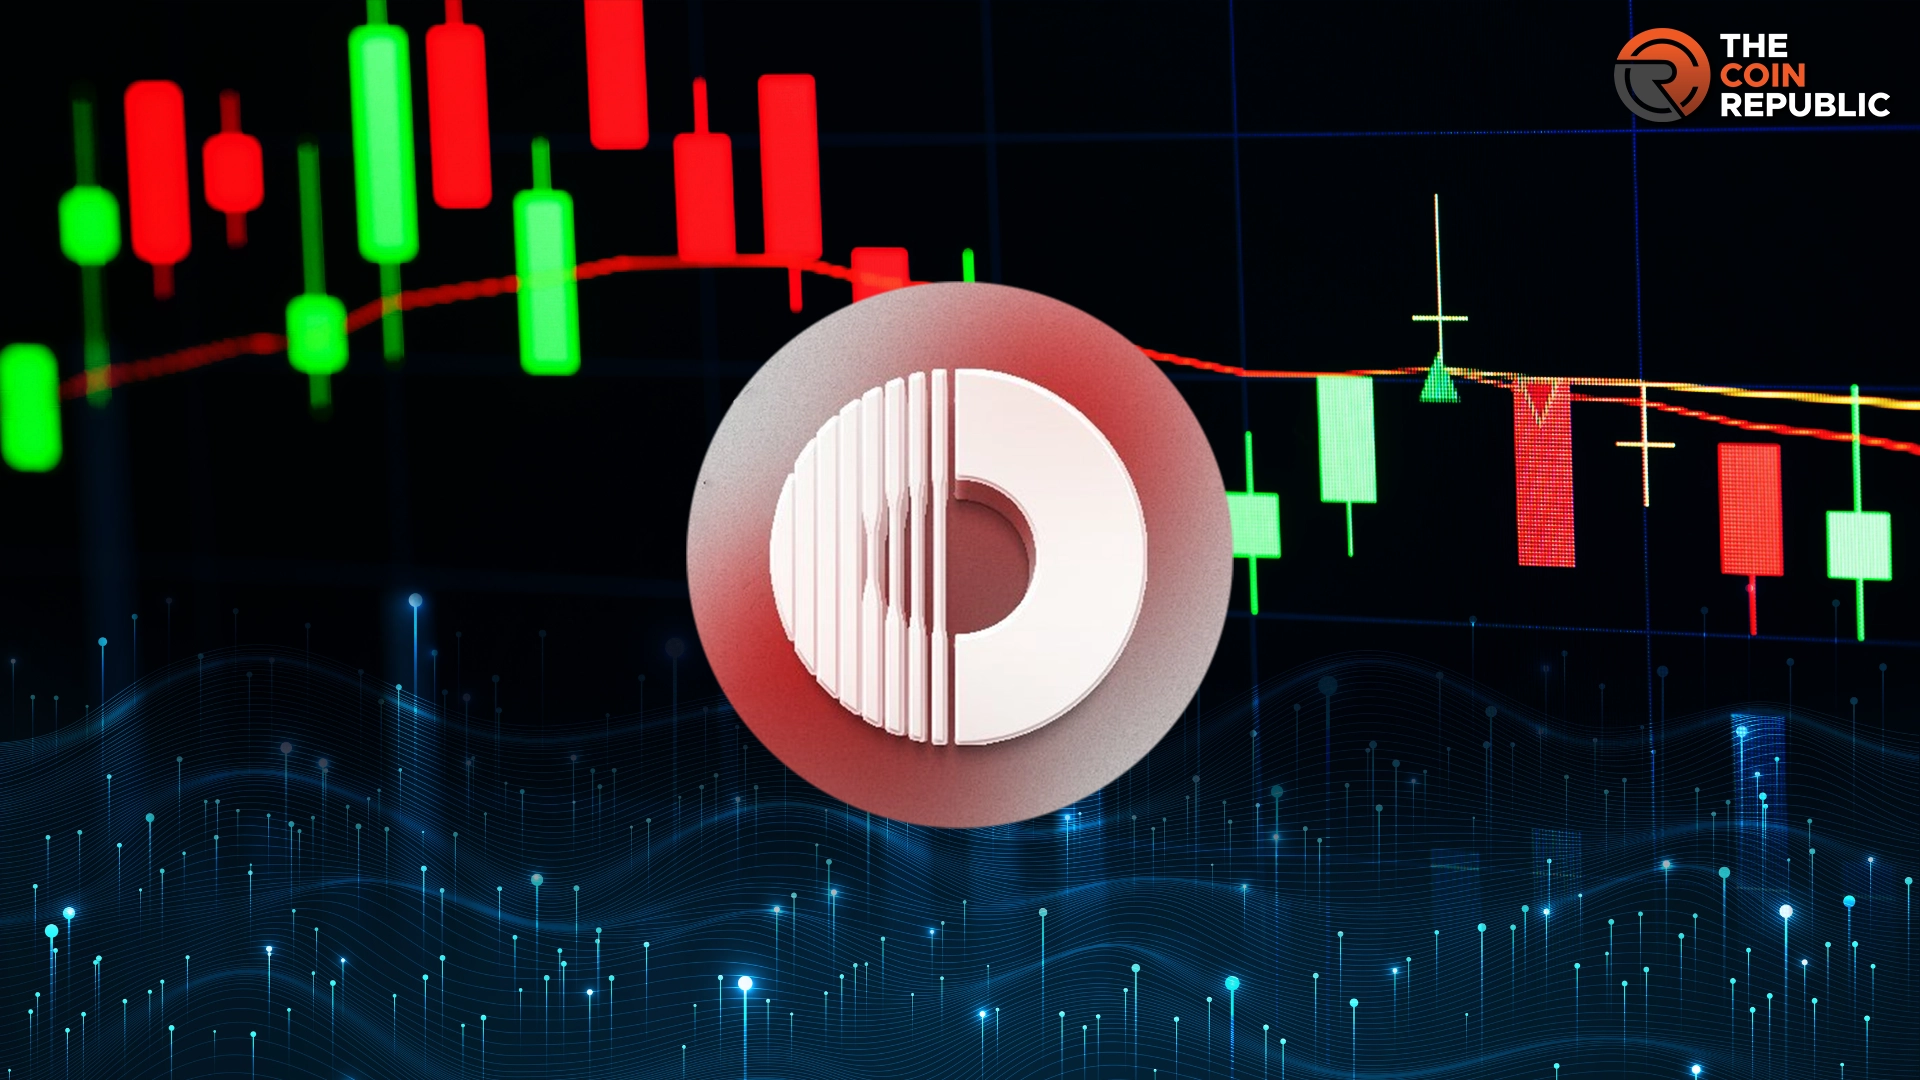 OpSec Price Prediction: OpSec Crypto Fell Massively; What Next?